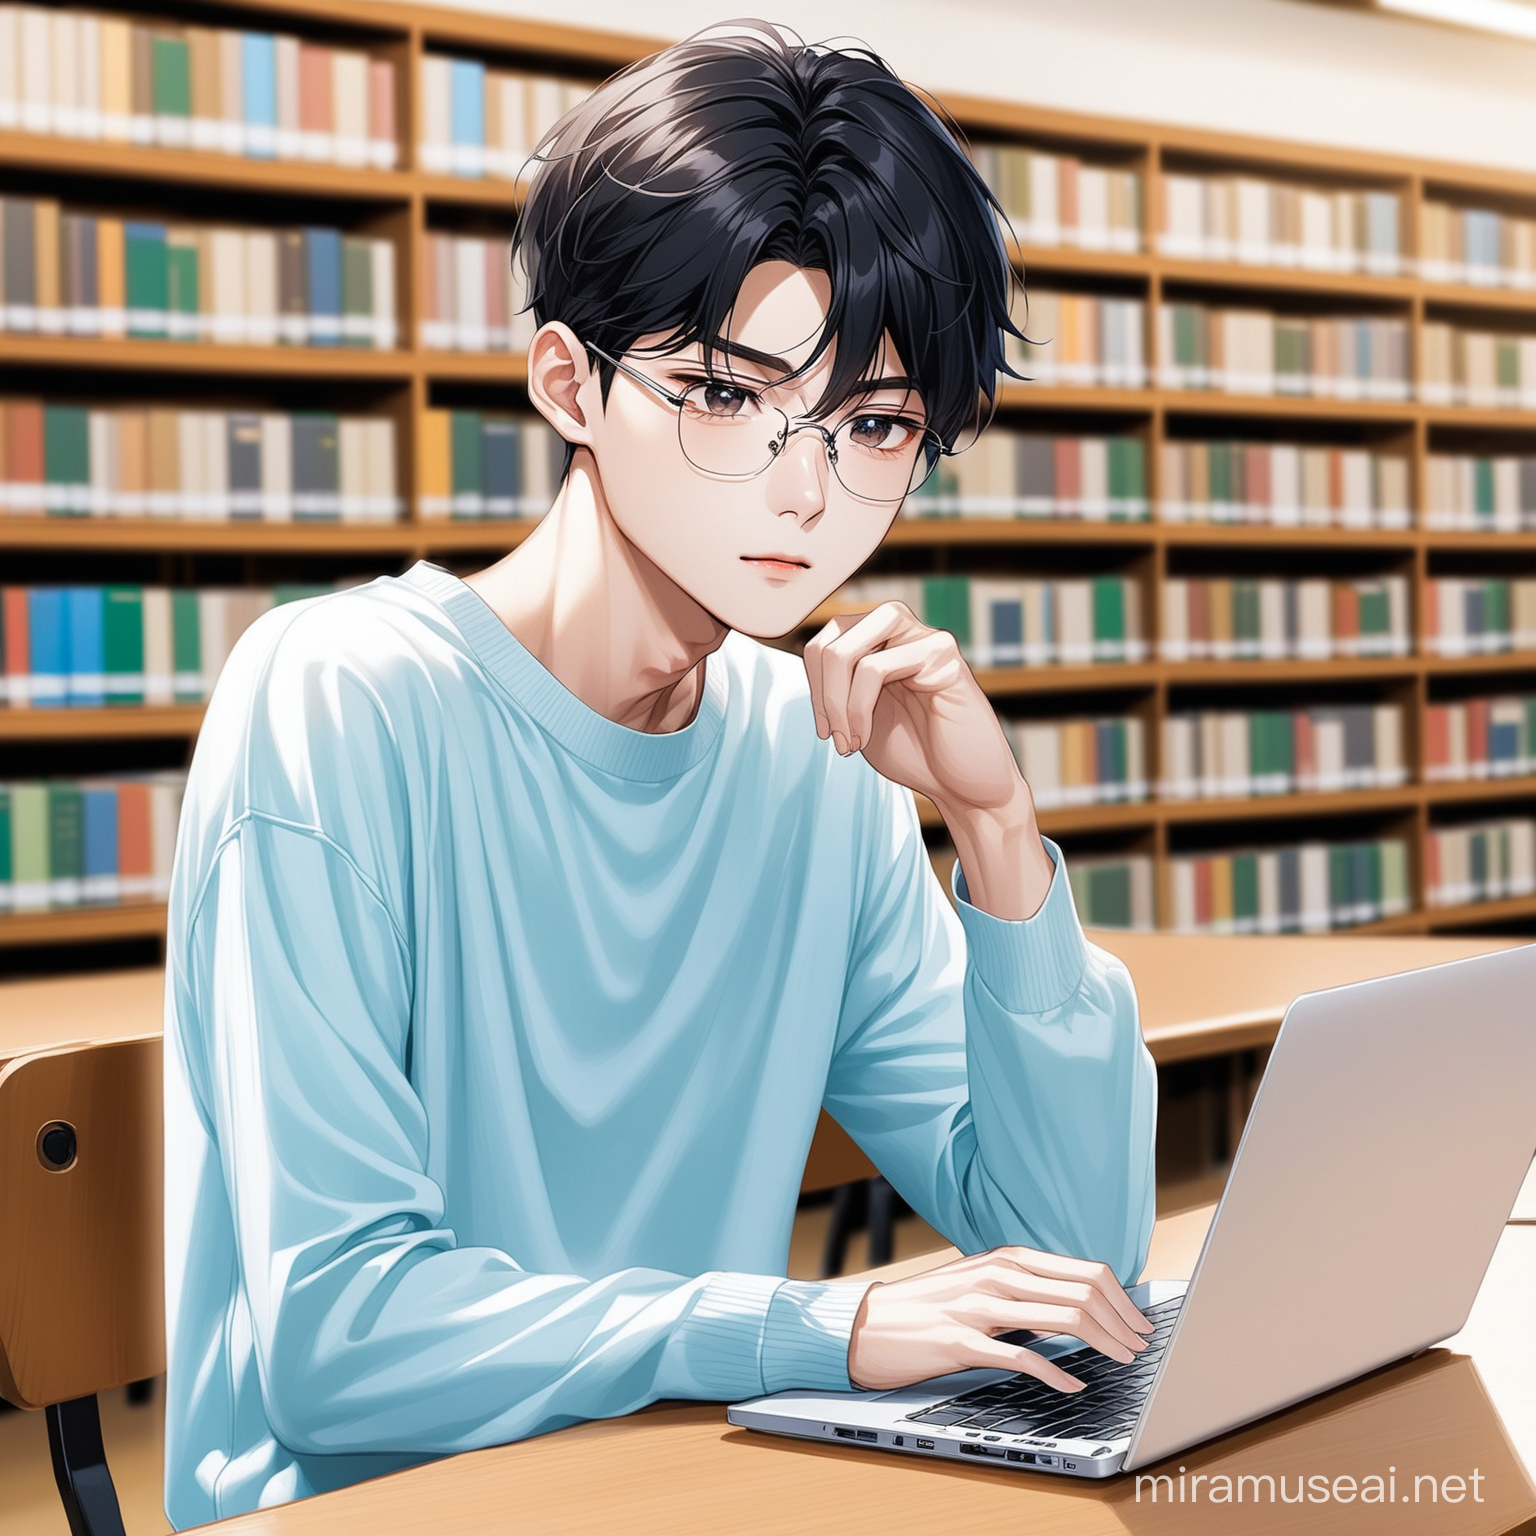 must look like an korean actor
Cha Eun Woo without glasses with laptop in library